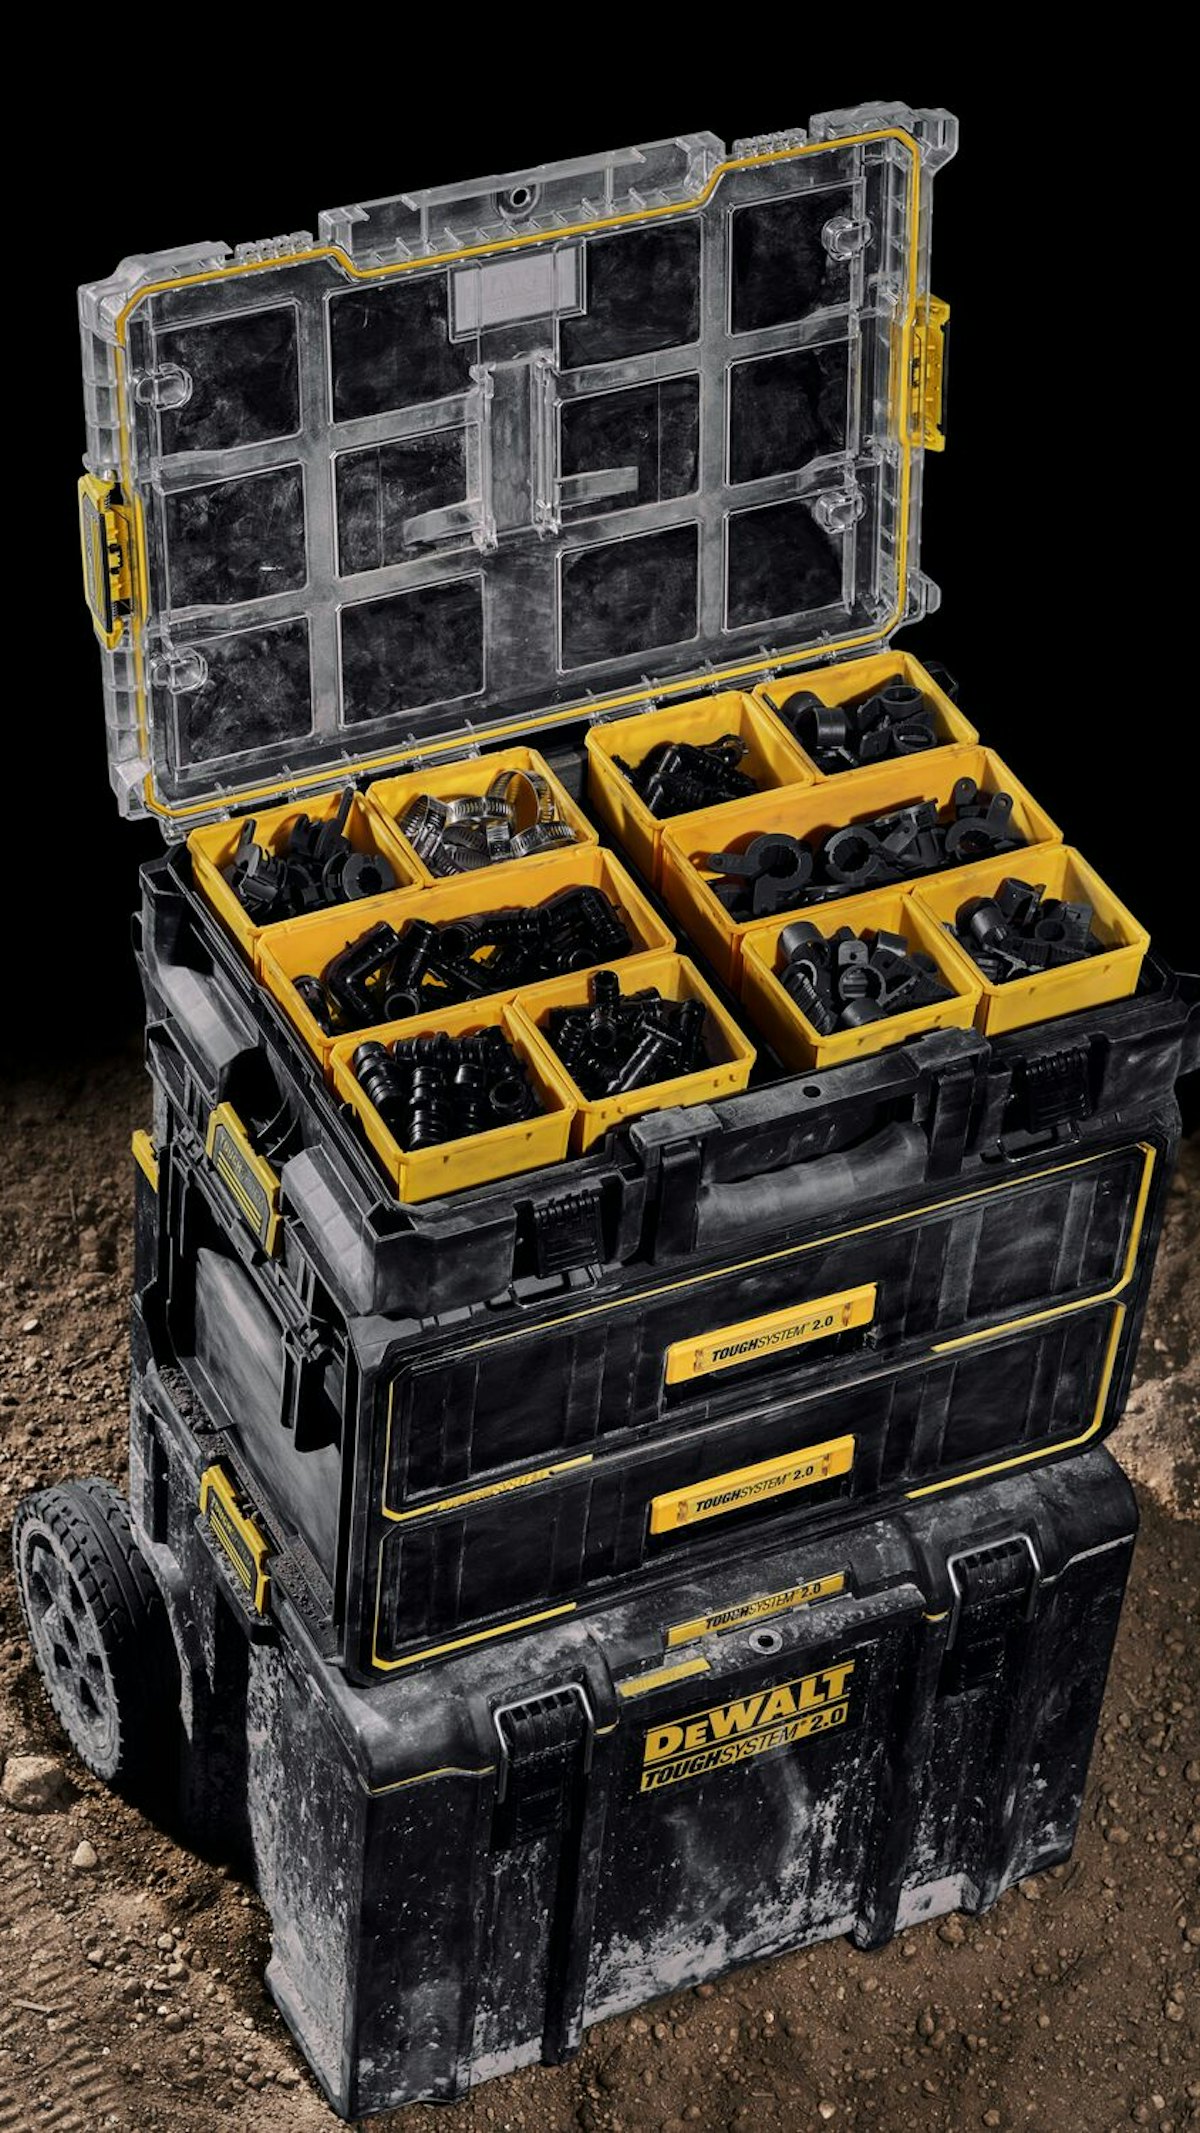 DeWalt ToughSystem 2.0, 22 in. Small Tool Box with 10-Compartment Pro Small Parts Organizer, Black